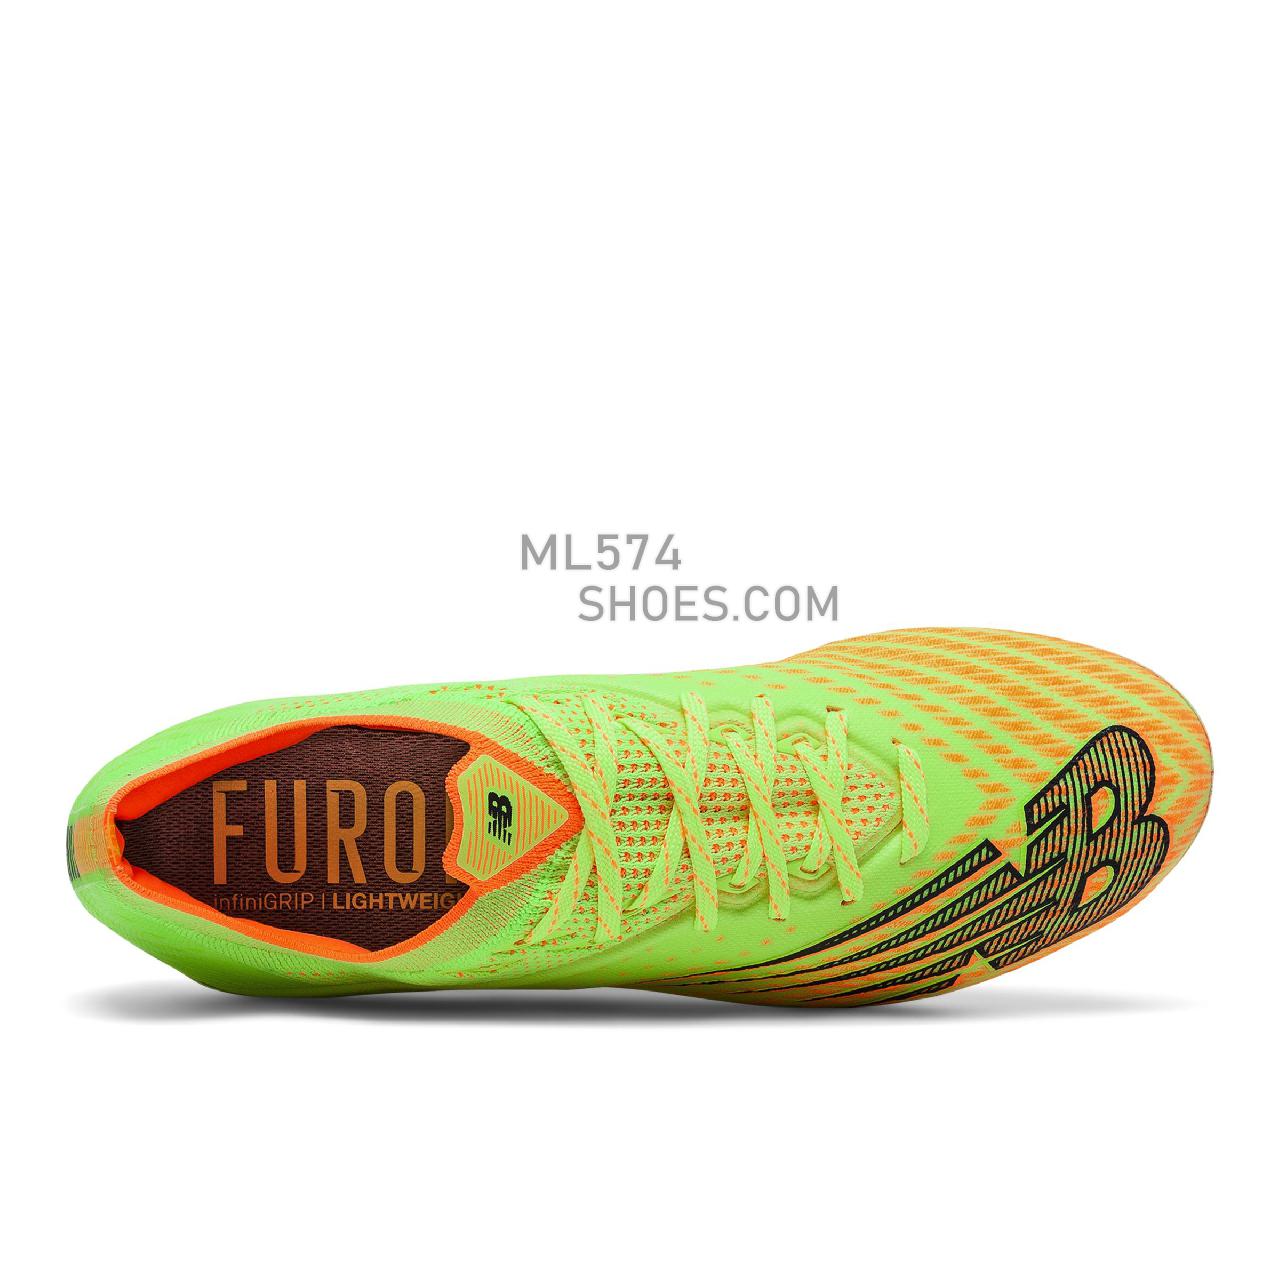 New Balance Furon v6+ Pro FG - Men's Soccer - Bleached Lime Glo with Citrus Punch - MSF1FS65